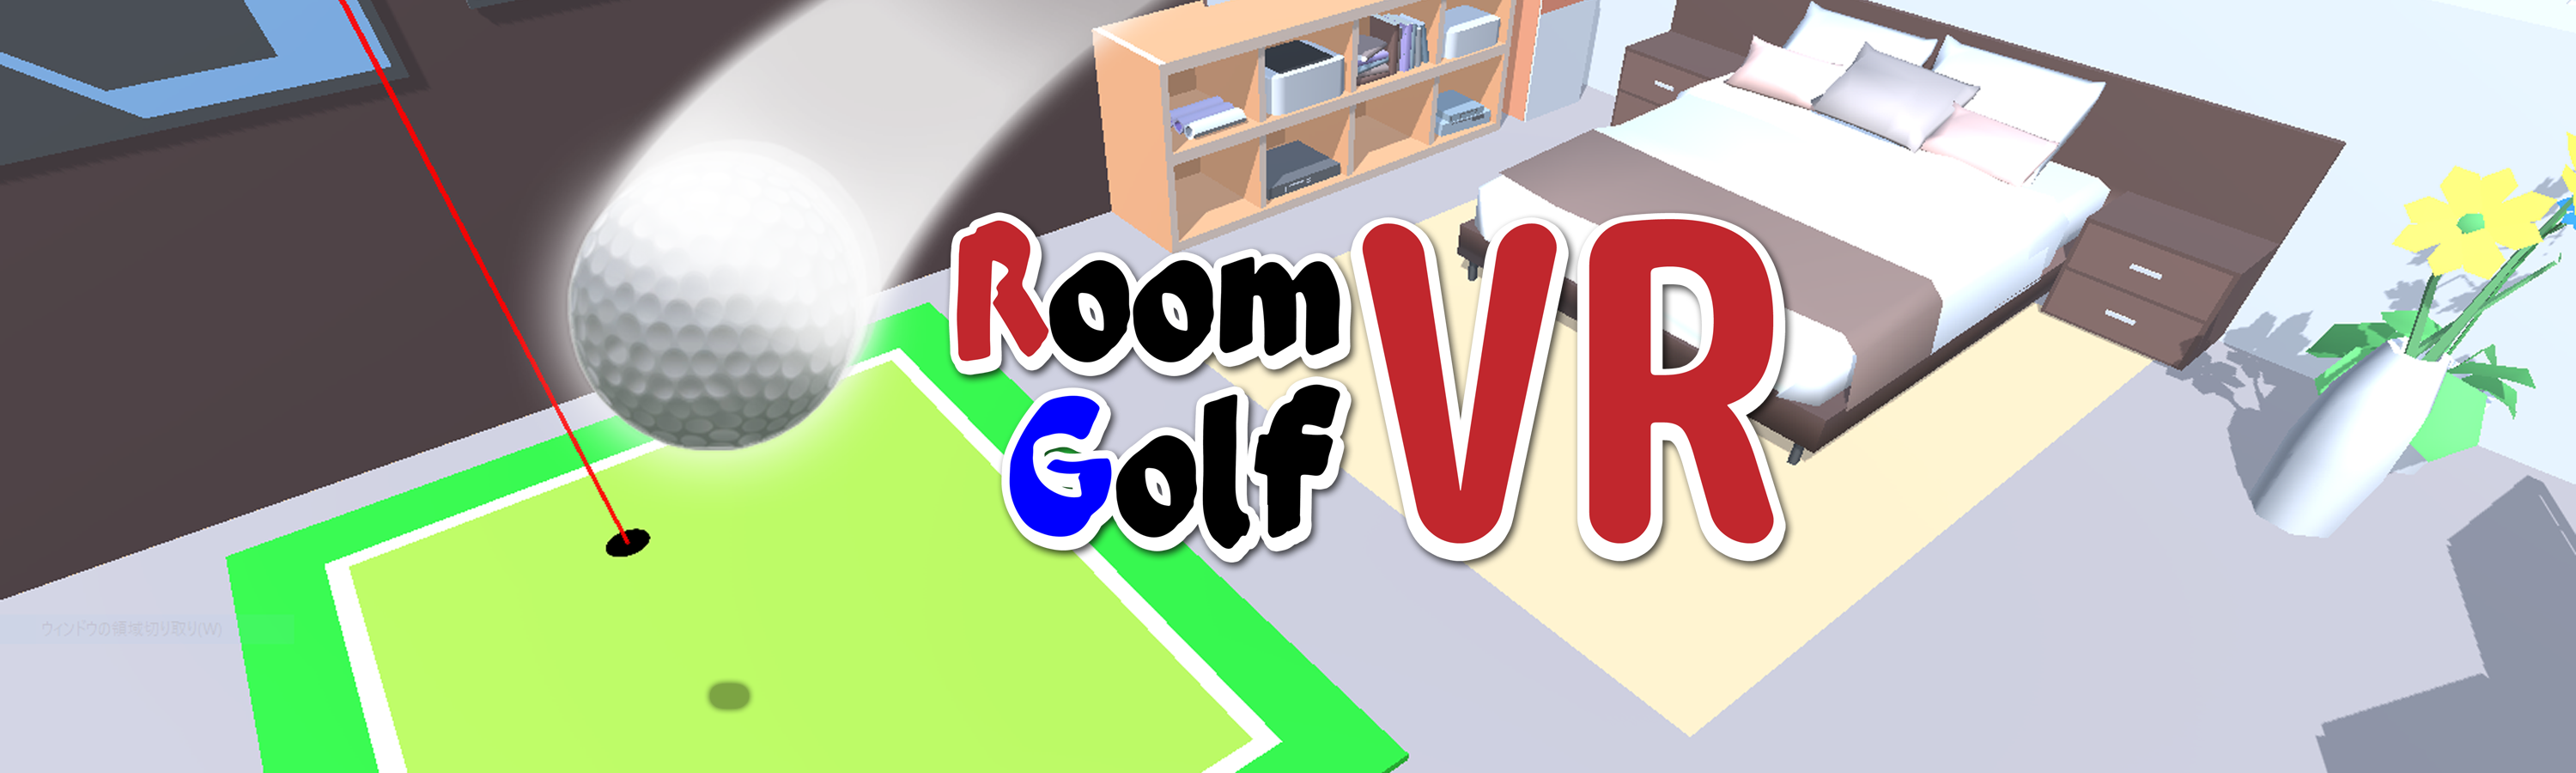 RoomGolfVR PDPArt